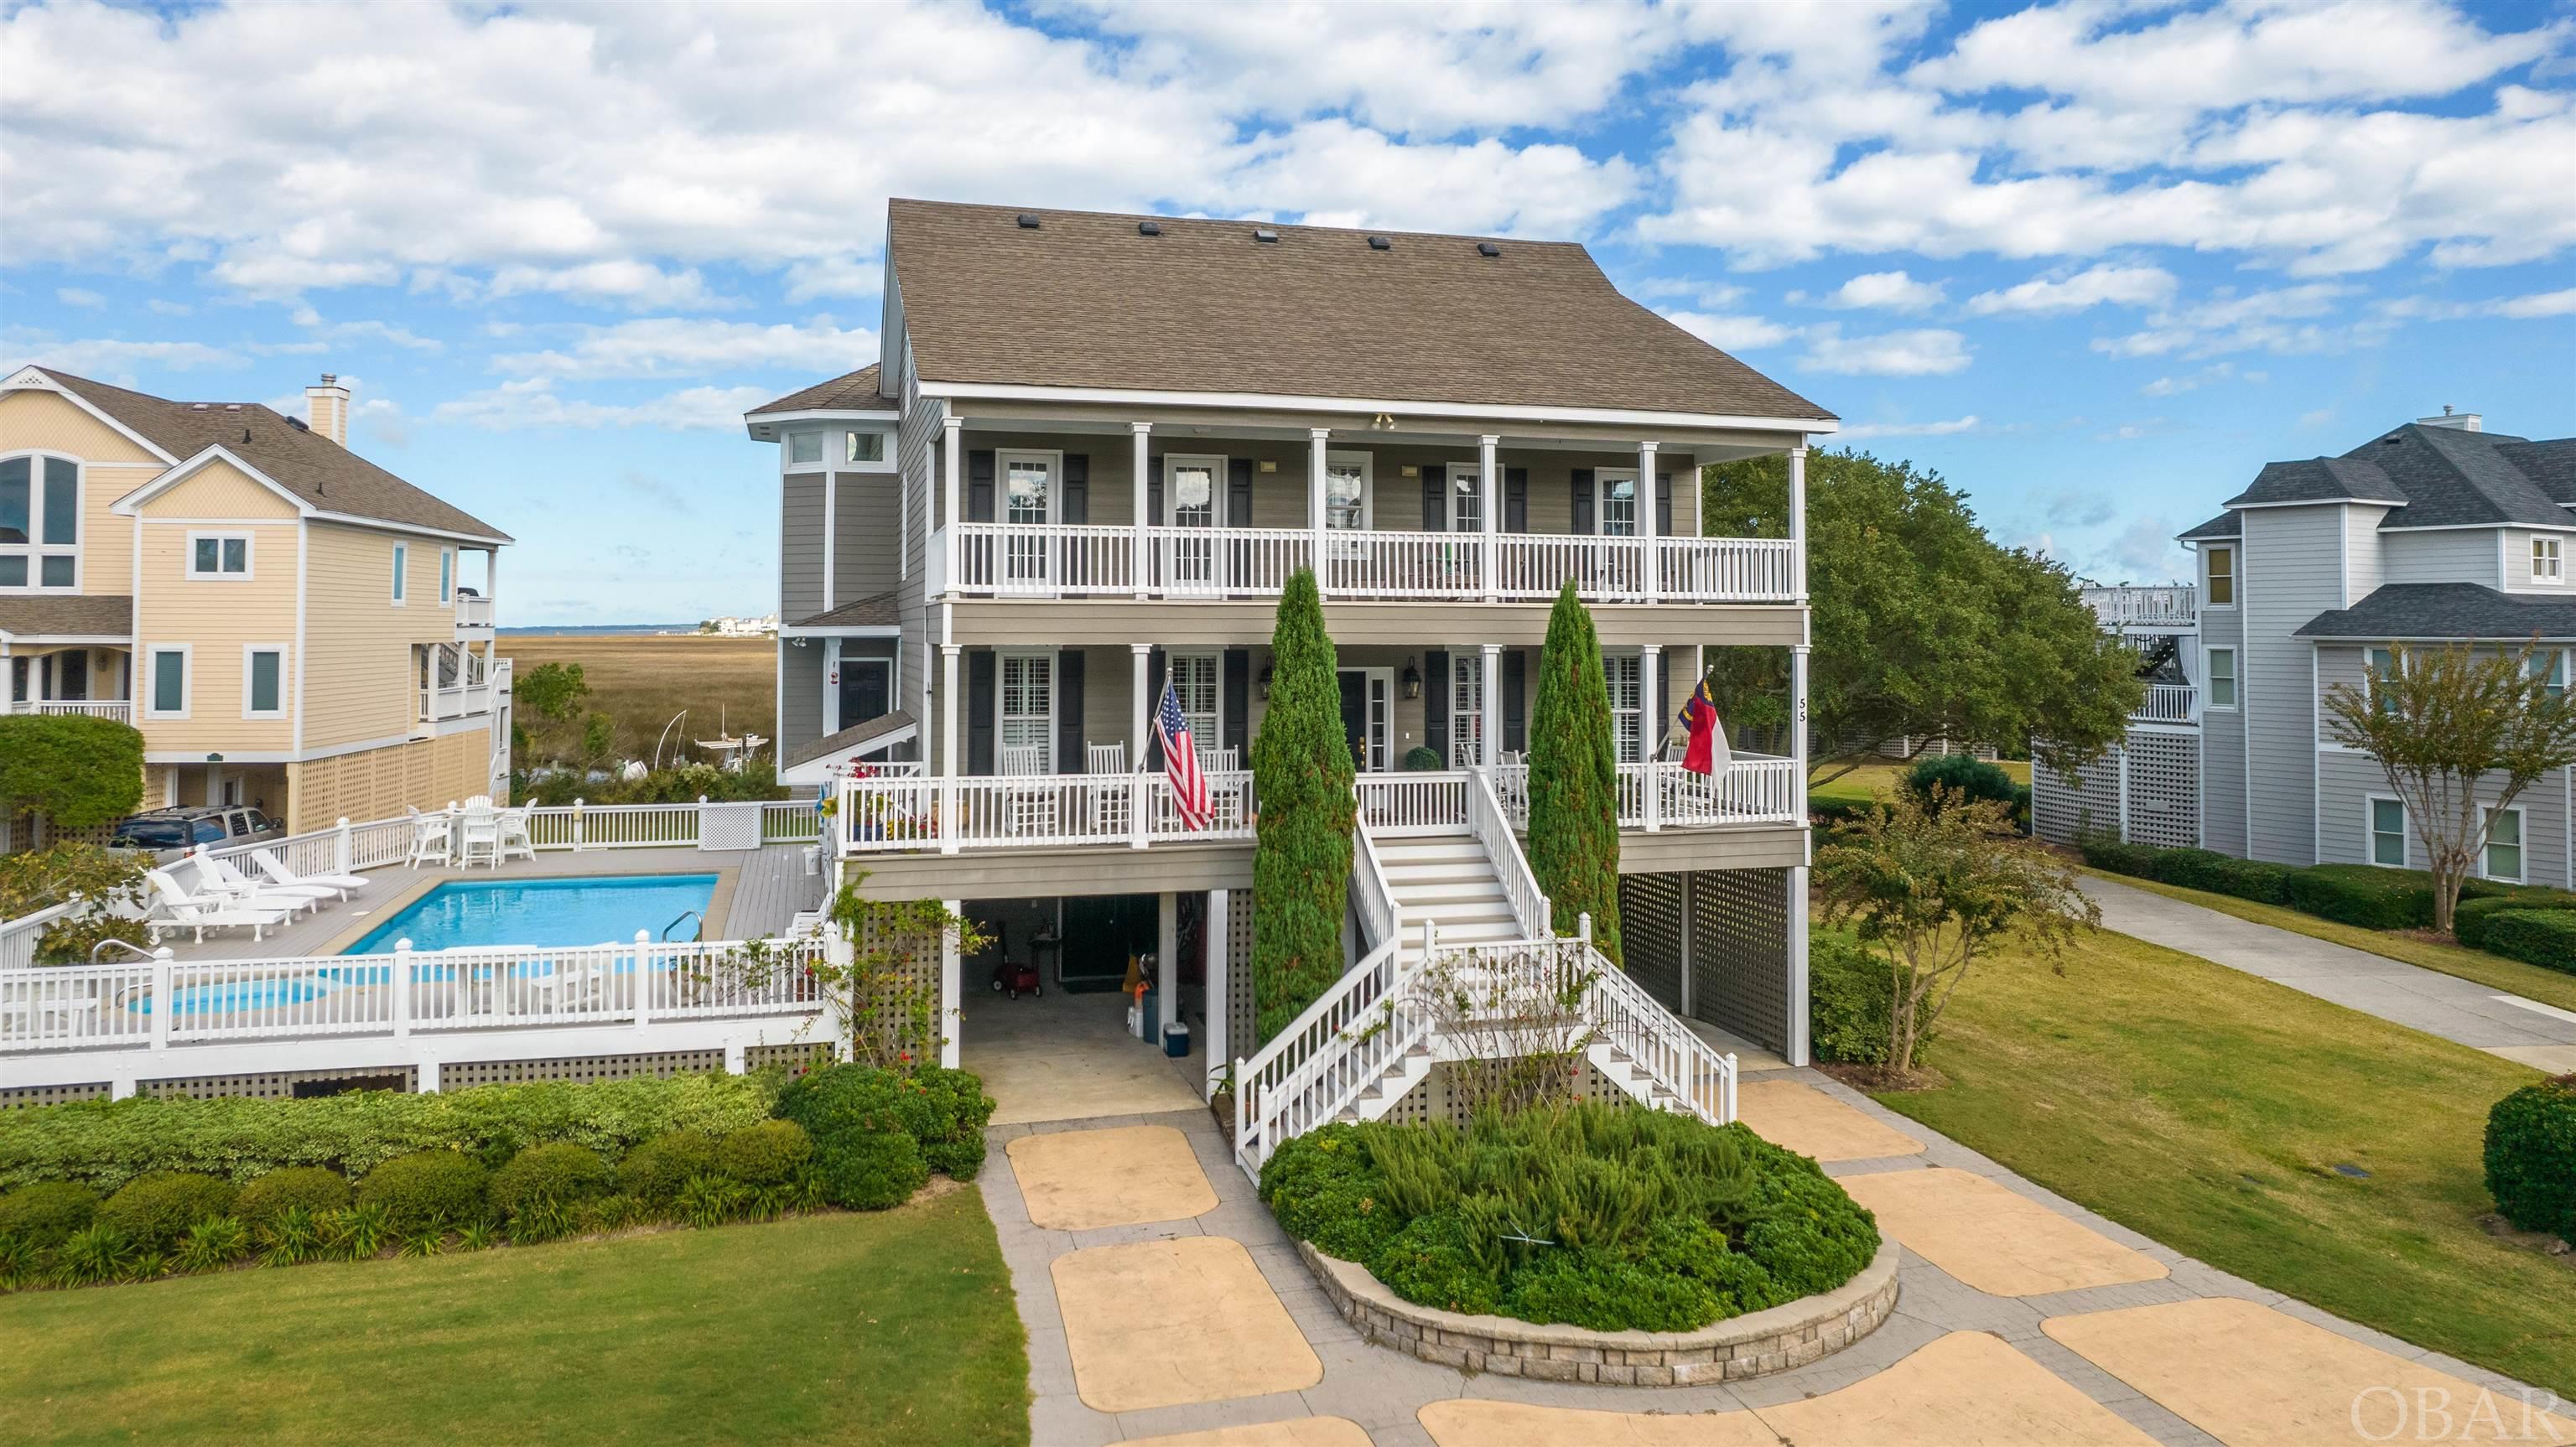 Rare opportunity to own coastal chic 5 BR home with both private & association pools! Southern Living style home, amazing water views abound, in highly sought after gated community of Pirate's Cove on Historic Roanoke Island. Main level has lovely guest room, office, living, kitchen, dedicated dining space with amazing views of sound & saltmarsh. Upstairs has two other bedrooms with shared full bath in hall, stunning primary bedroom offers fabulous walk-in closet & en suite with jacuzzi tub! Top floor has two beds, two storage closet/attic spaces, and "bonus" full bath for your guests to enjoy their own private getaway. The views are absolutely breathtaking!! Fisherman/handyman special downstairs with additional 900 sq ft of storage space, including "bonus" half bath, extra owners closet area & outdoor shower.   Relax in shade of porch, lounge in sun by your own saltwater pool, or hit the water in ease with 55 ft of boat moorage available right at your back door! 50 amp shore power also on dock directly behind house, for qualifying buyers per PCHOA bylaws.  Charming nautical community boasts world class Marina, ship store, community pool, clubhouse, owners pool, tennis courts, playground, & beautiful walking along docks. Pirates Cove offers mix of year round residences, second homes, & vacation rentals, and is host to the world famous Pirate's Cove Big Game Fishing Tournament!        Home being sold unfurnished, some furnishings may be negotiable. Please refer to PCHOA Bylaws in assoc docs for more info on association amenities & expenditures. Boat slip available to qualifying buyers with boat, $160/yr fee. $300 Buyer Conveyance Fee due at closing to PCHOA. Listing Agent is related to Sellers.